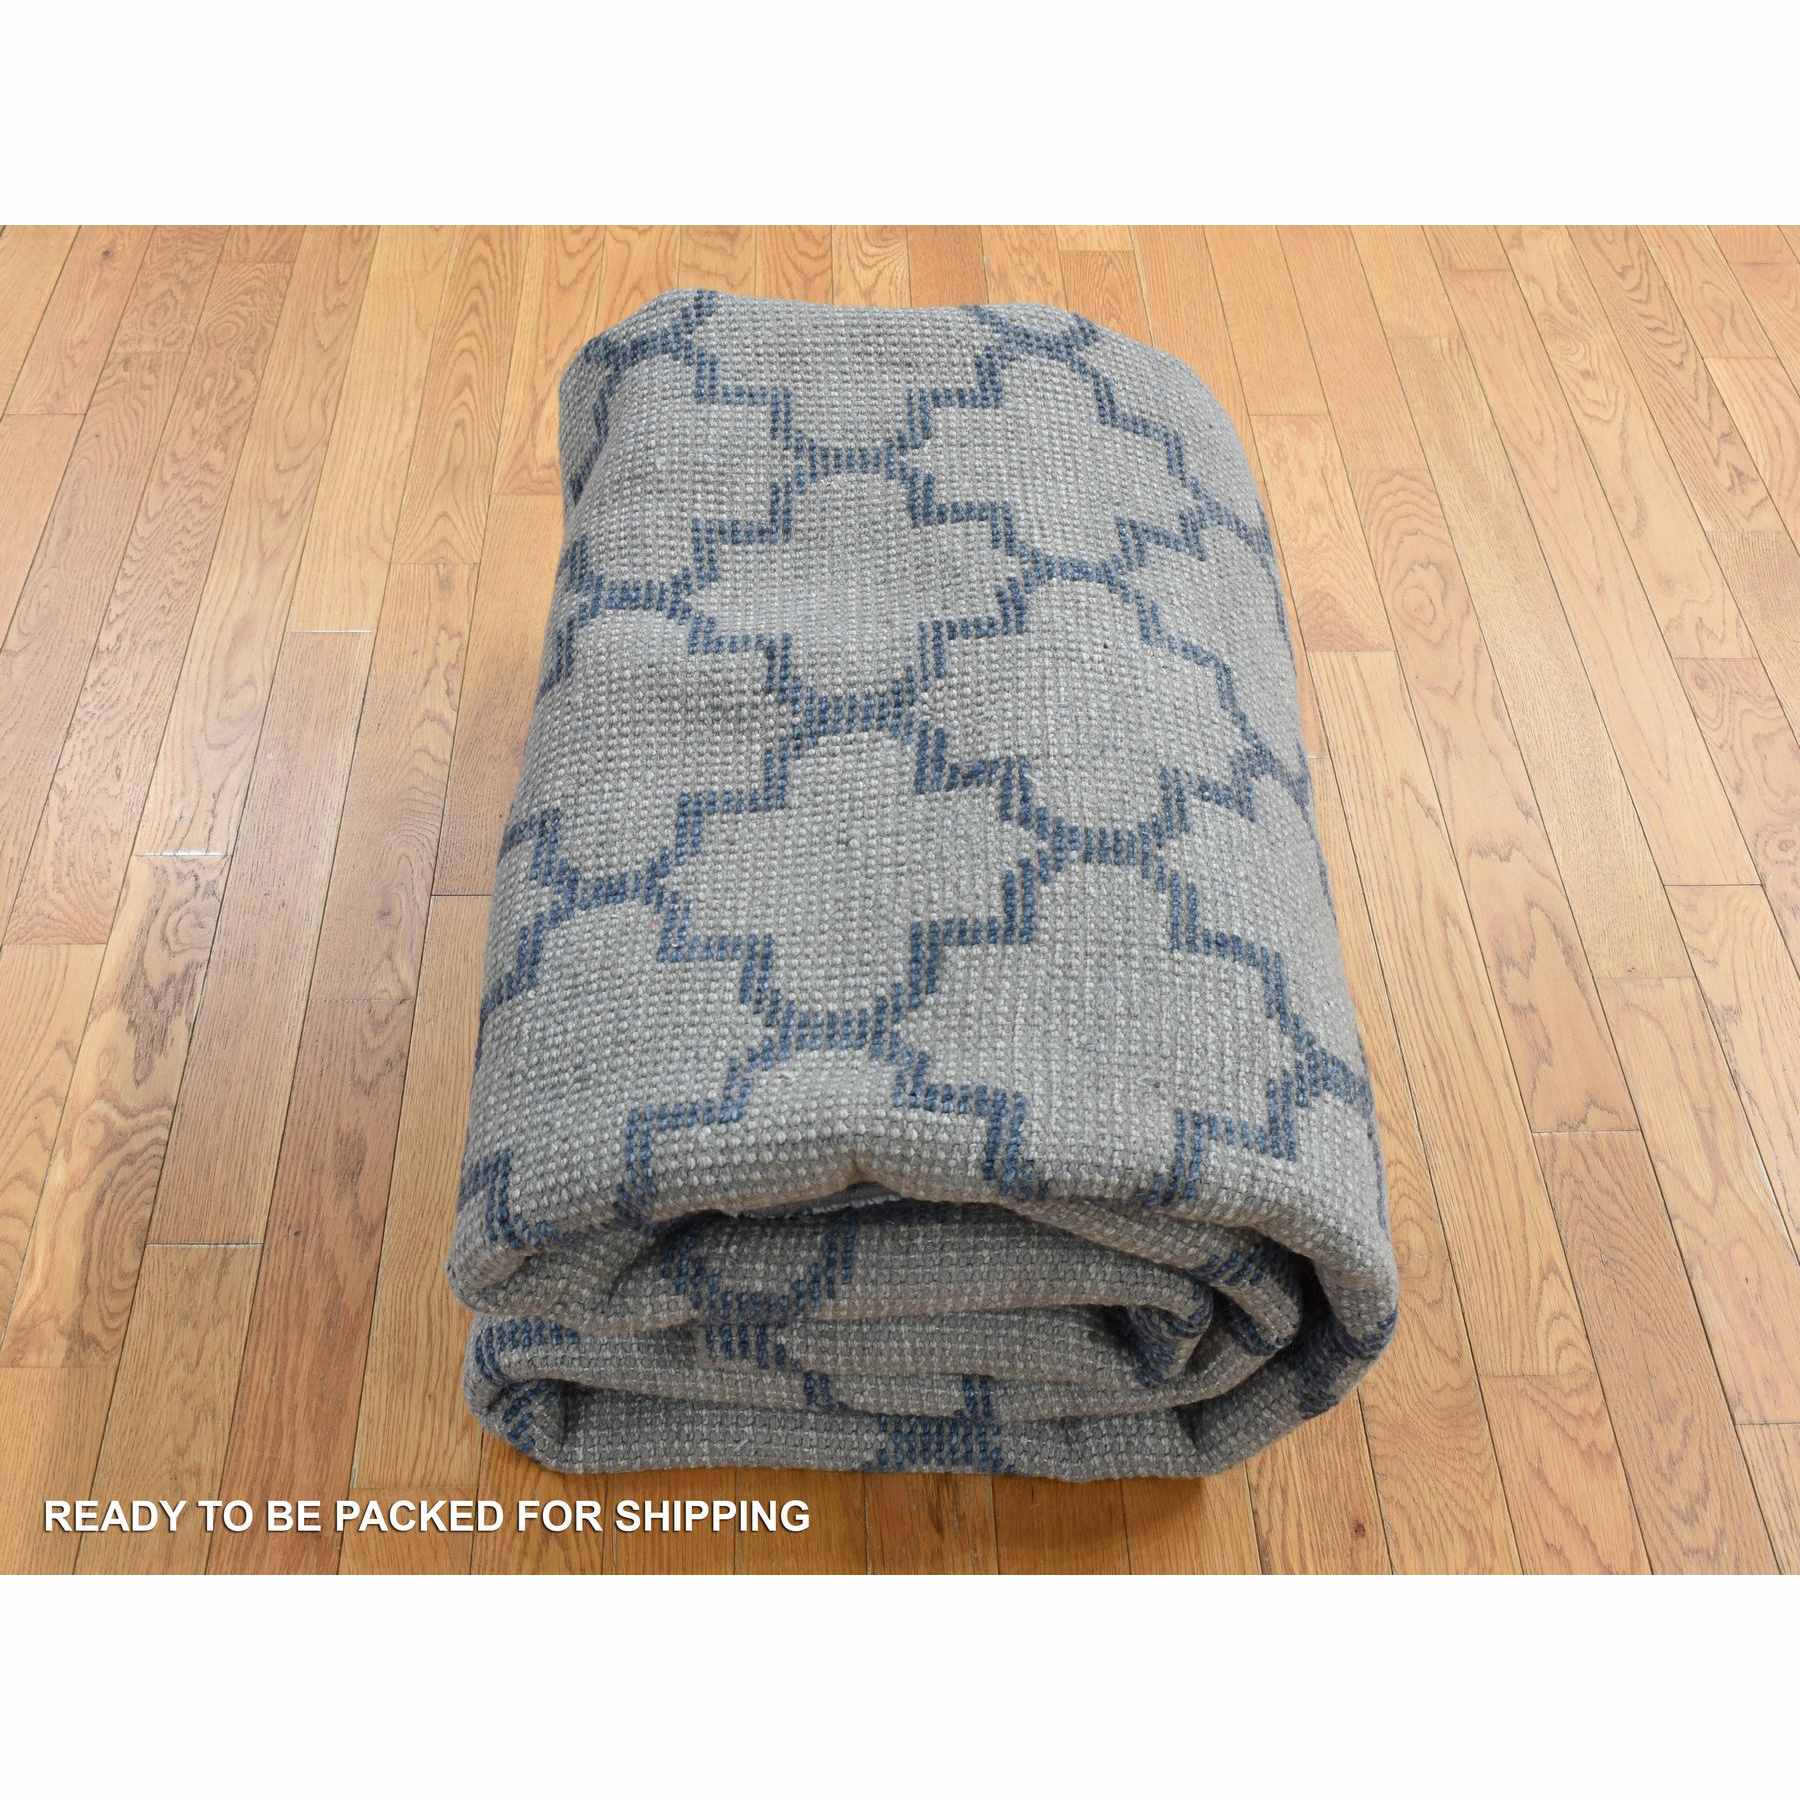 Modern-and-Contemporary-Hand-Knotted-Rug-435125